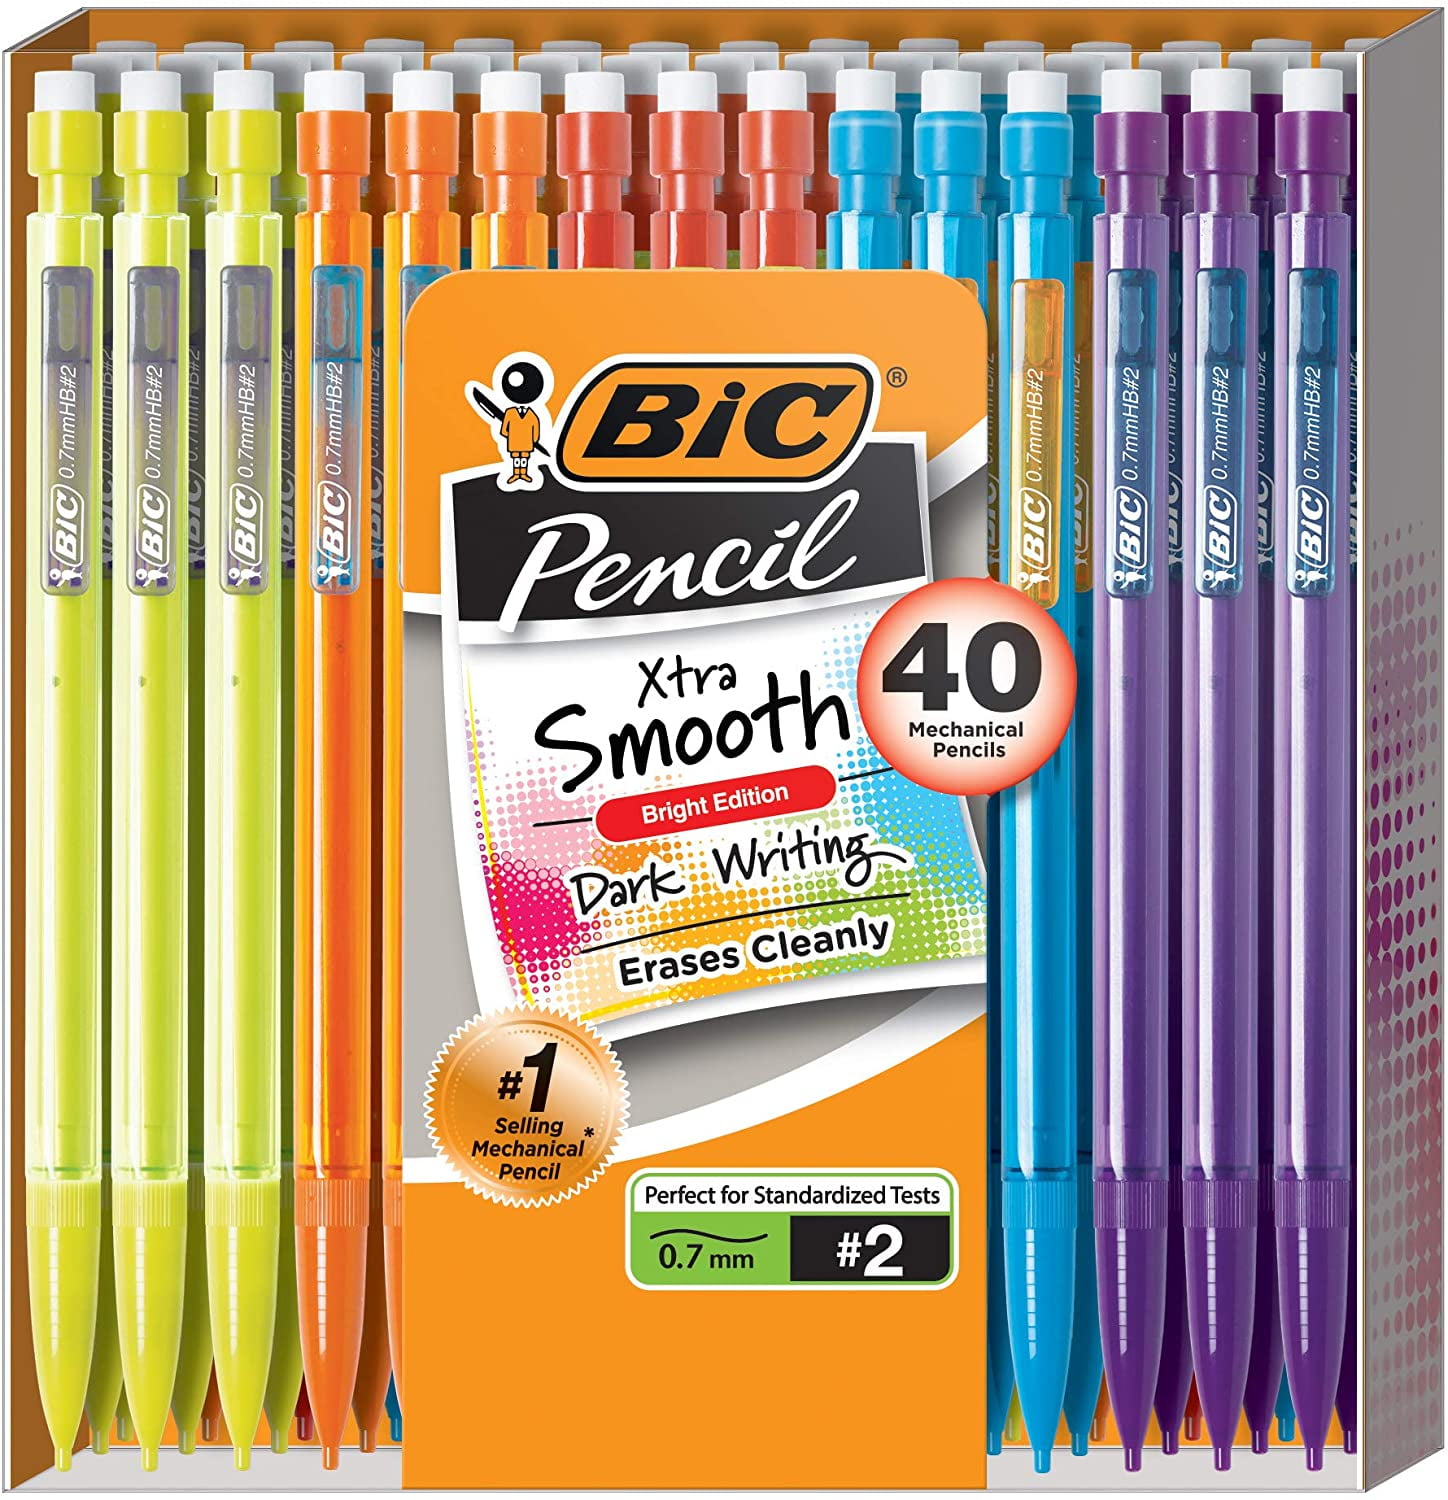 40-Count BIC Mechanical Pencil Xtra Smooth Bright Edition 0.7mm Black 